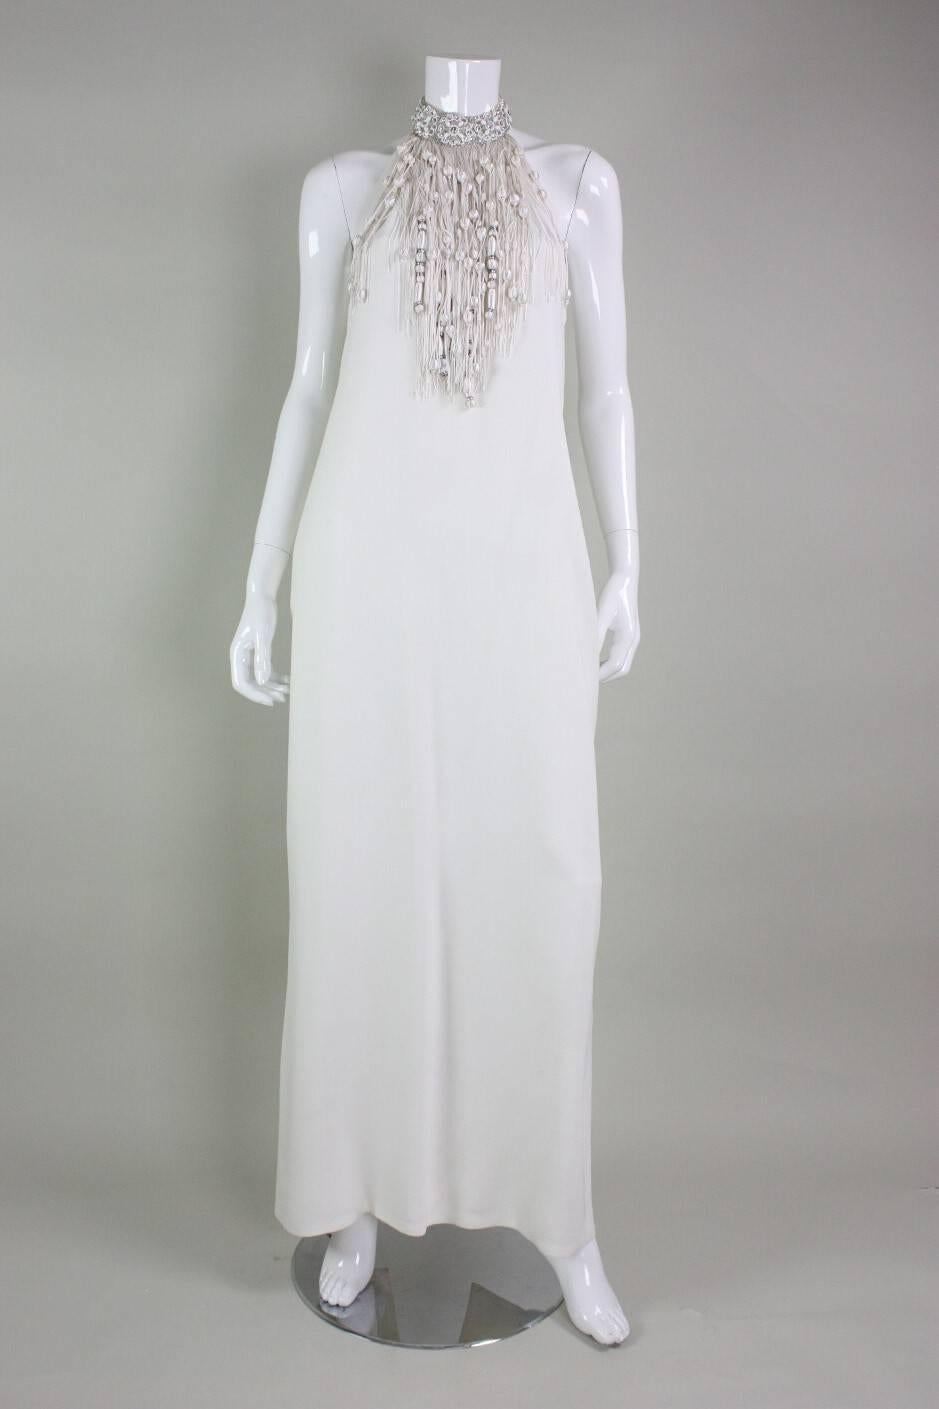 Vintage Valentino column gown is made of off-white crepe with fringed neckline.   Mock neck is encrusted with beading of various sizes and rhinestones.  Halter style with upper and mid-back exposed.   Center back slit in skirt.  Fully lined.  Center